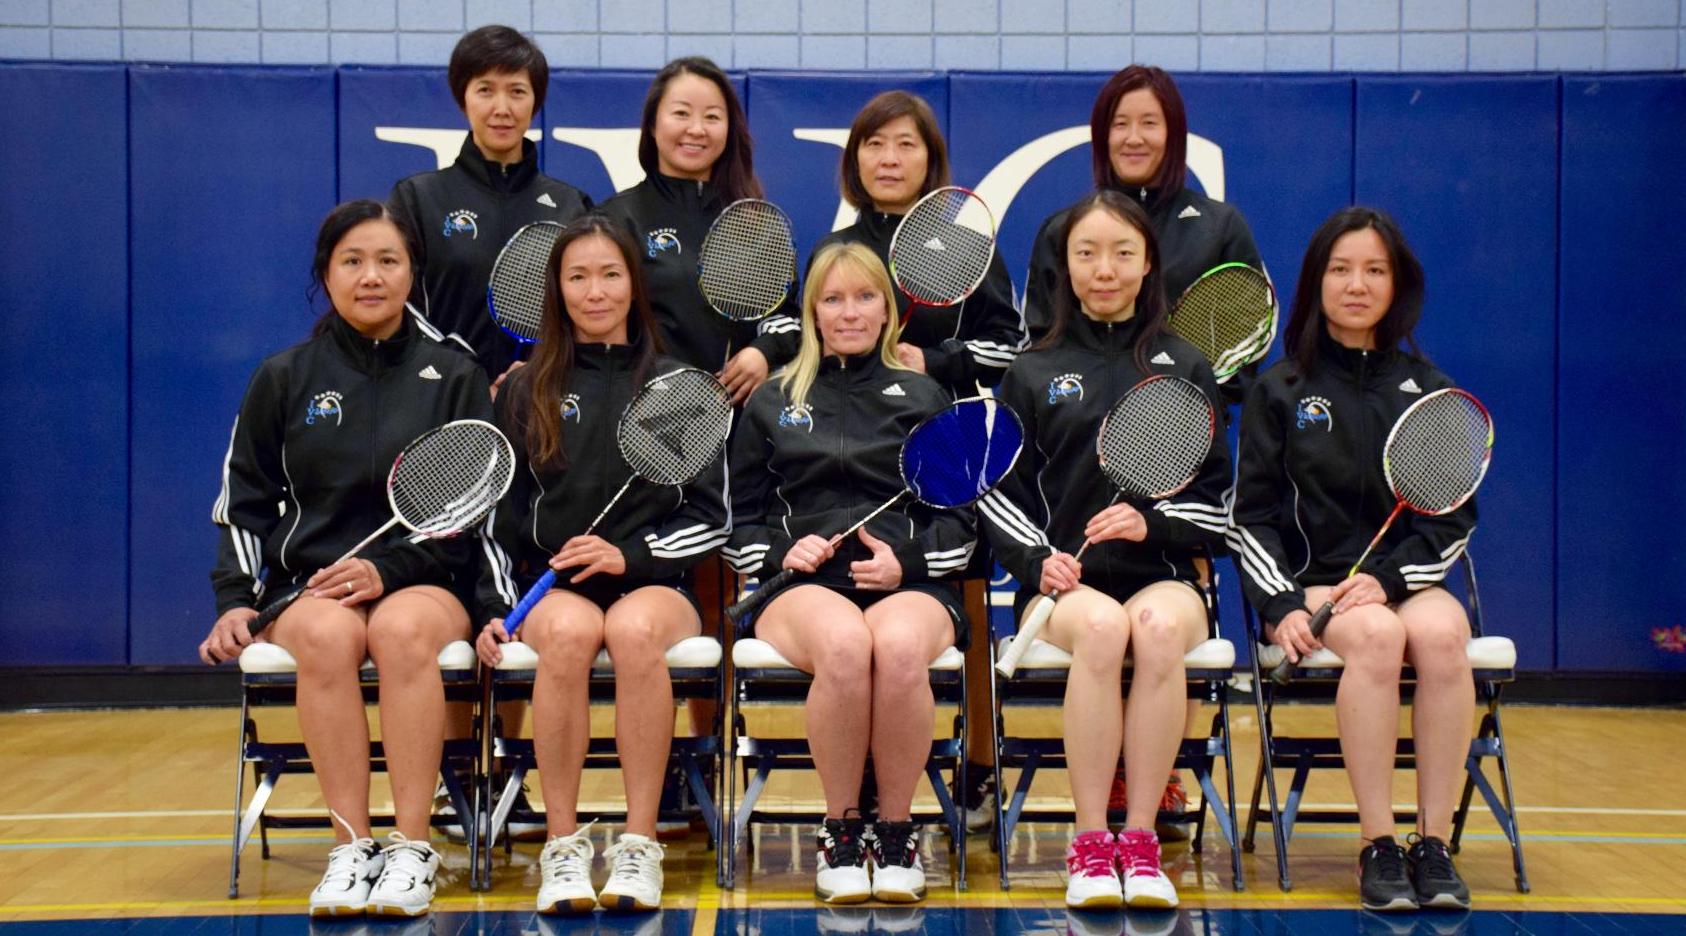 Badminton players win singles and doubles titles at PCAC Finals